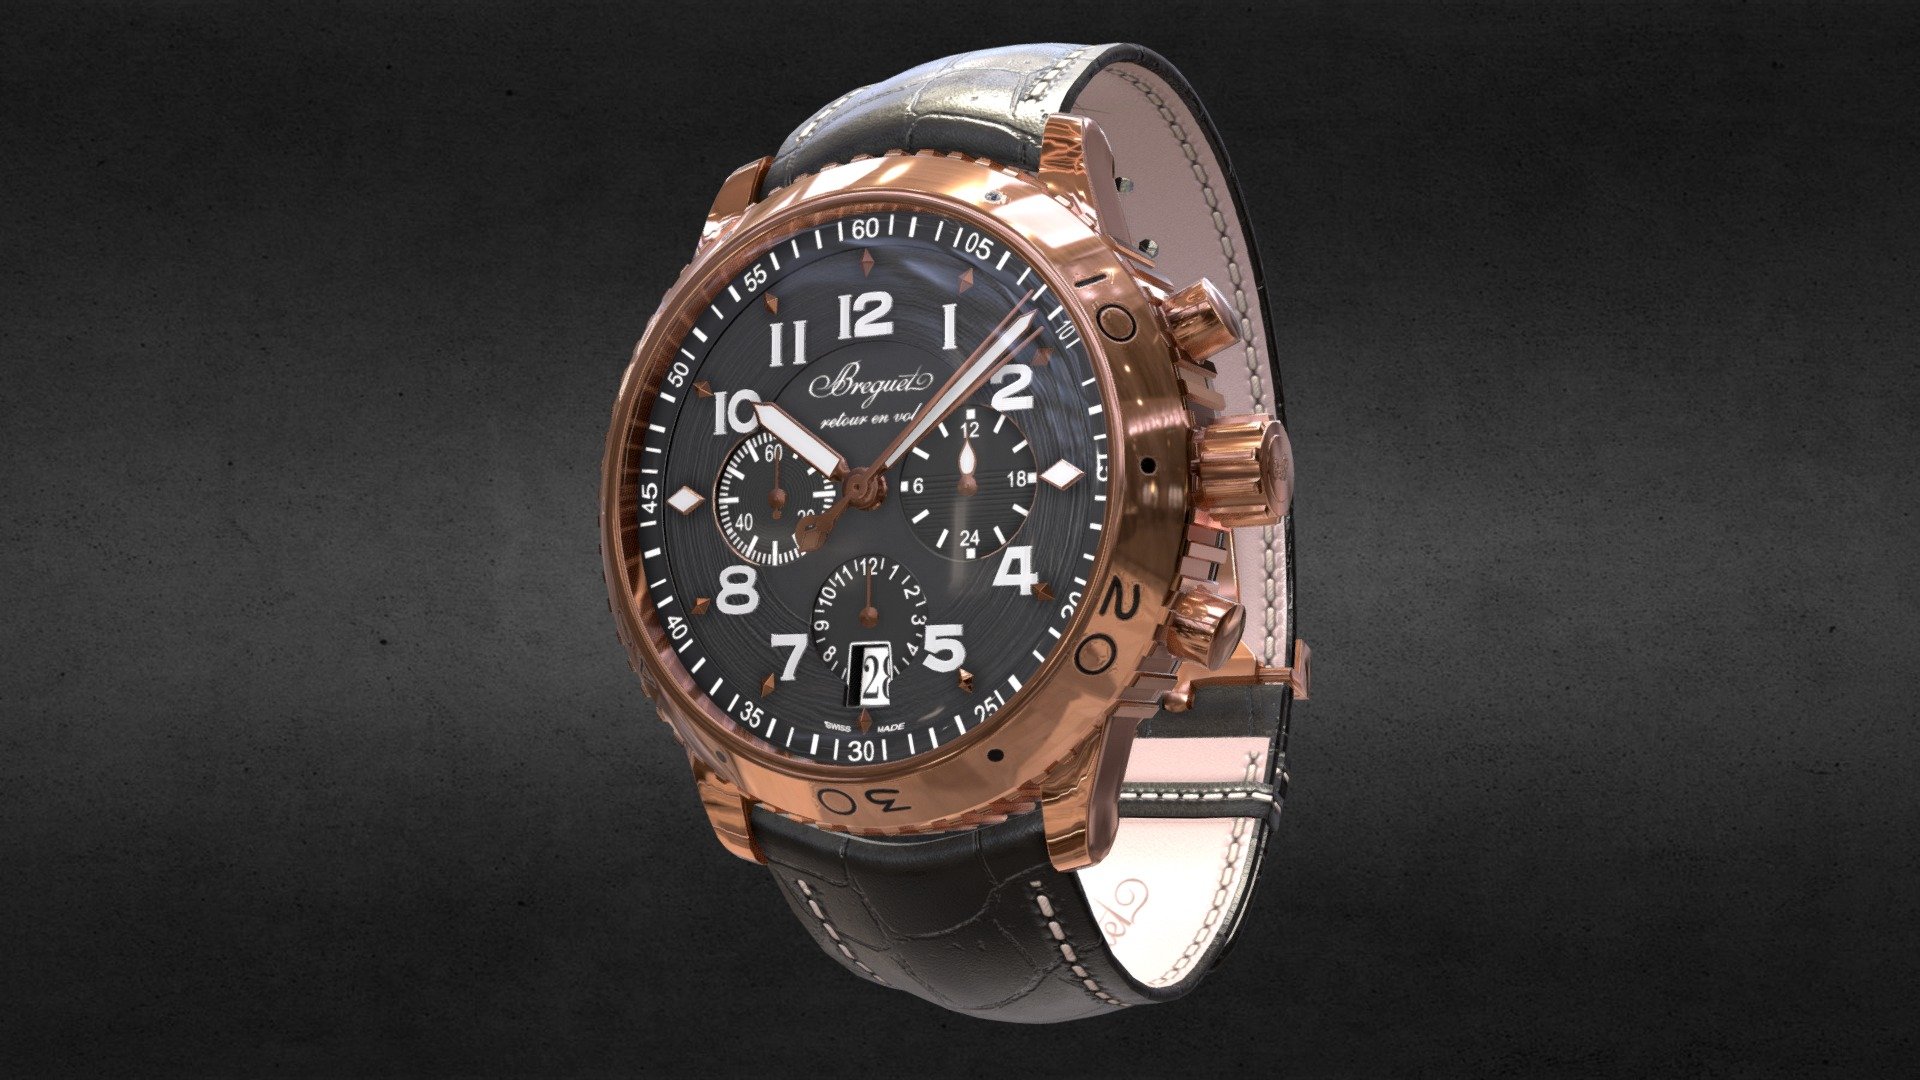 Awesome stainless steel Breguet Type XX-XXI-XXII 3810BR/92/9ZU watch․
Use for Unreal Engine 4 and Unity3D. Try in augmented reality in the AR-Watches app. 
Links to the app: Android, iOS

Currently available for download in FBX format.

3D model developed by AR-Watches

Disclaimer: We do not own the design of the watch, we only made the 3D model 3d model